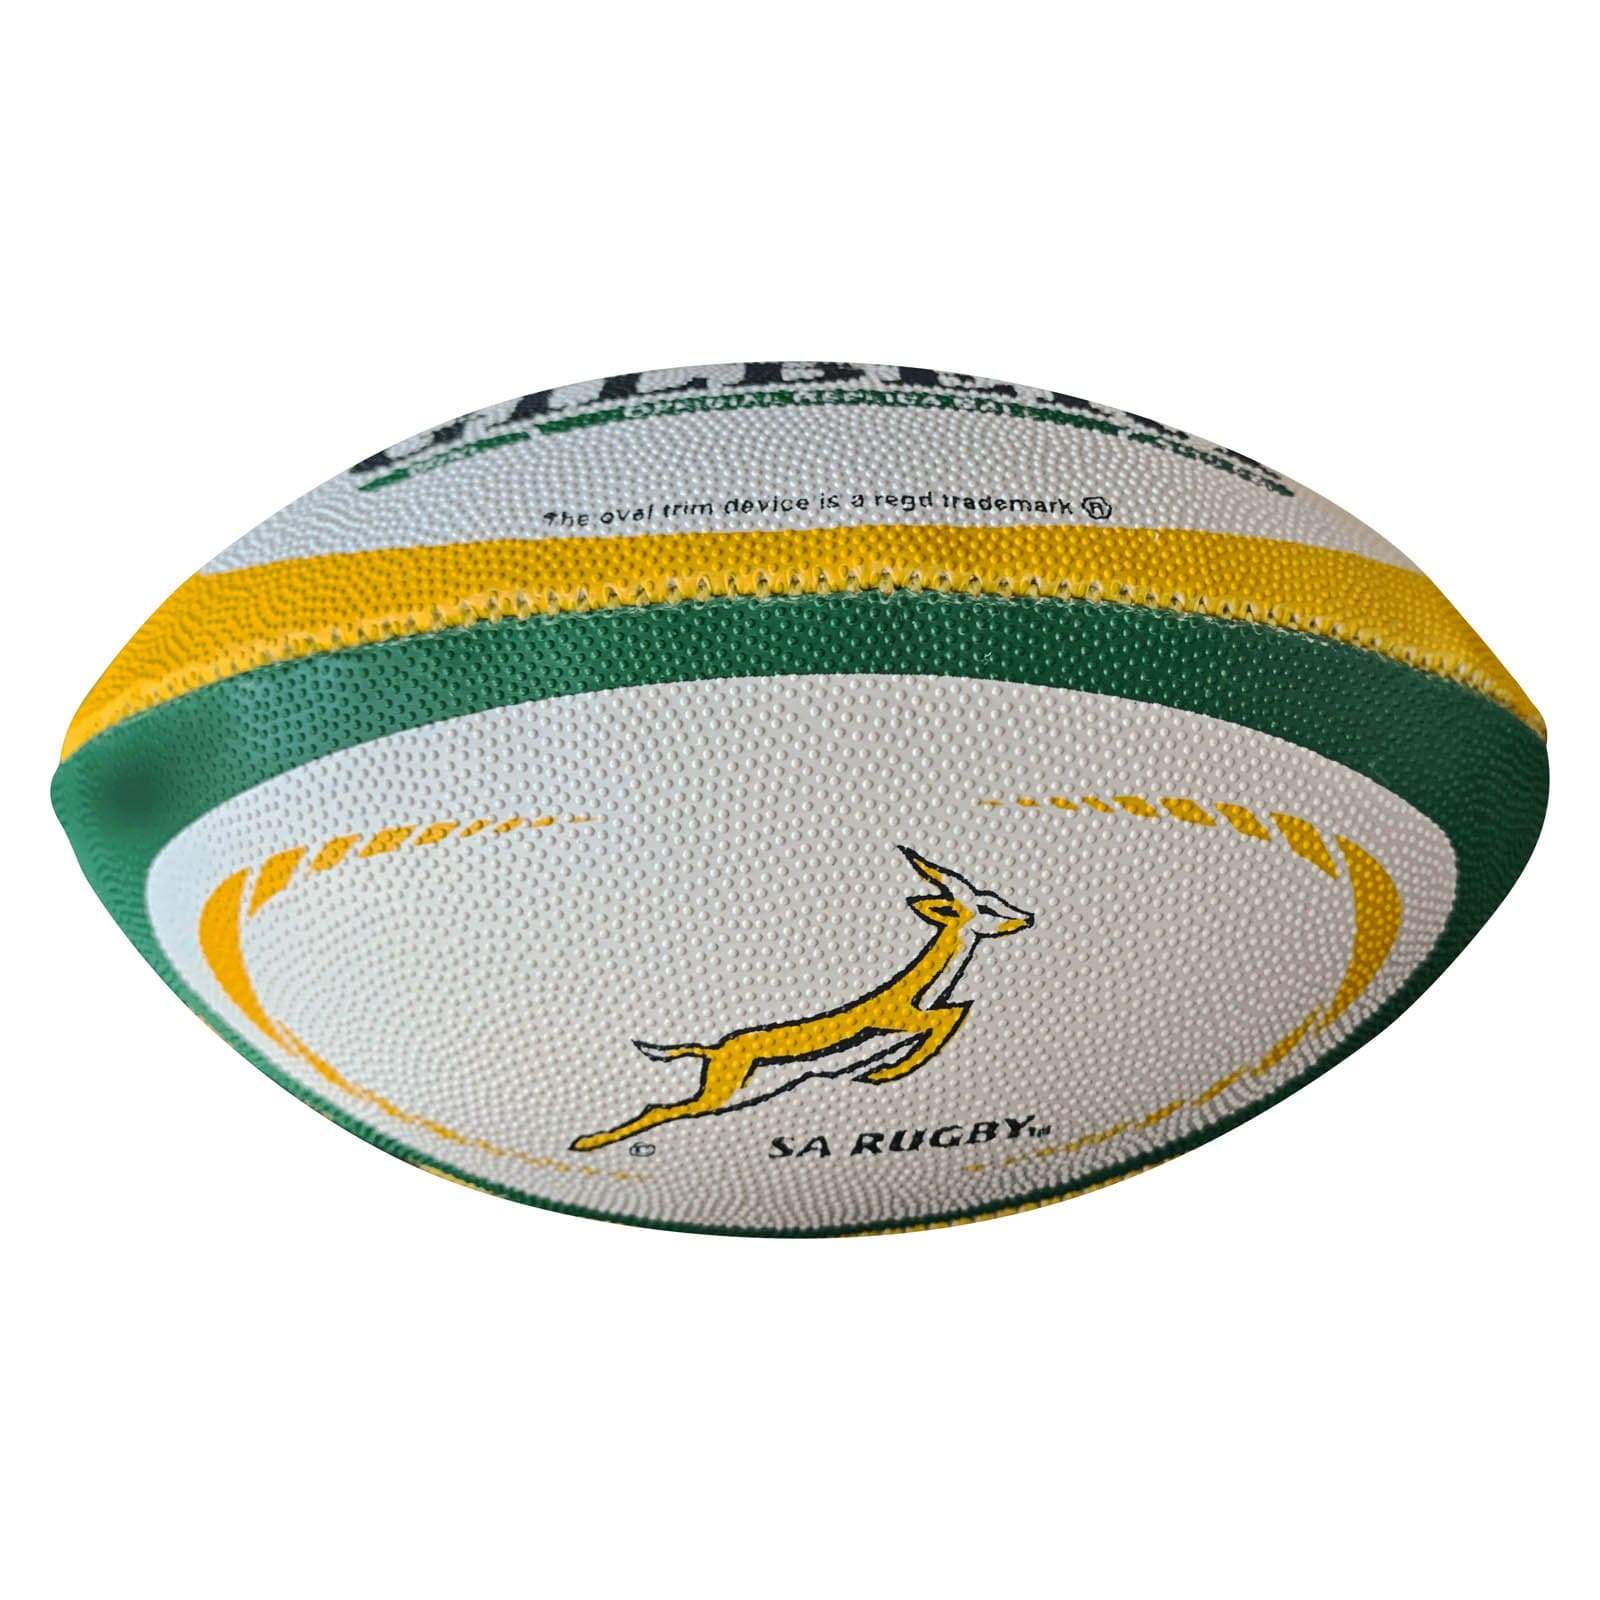 Gilbert South Africa Mini Rugby Ball